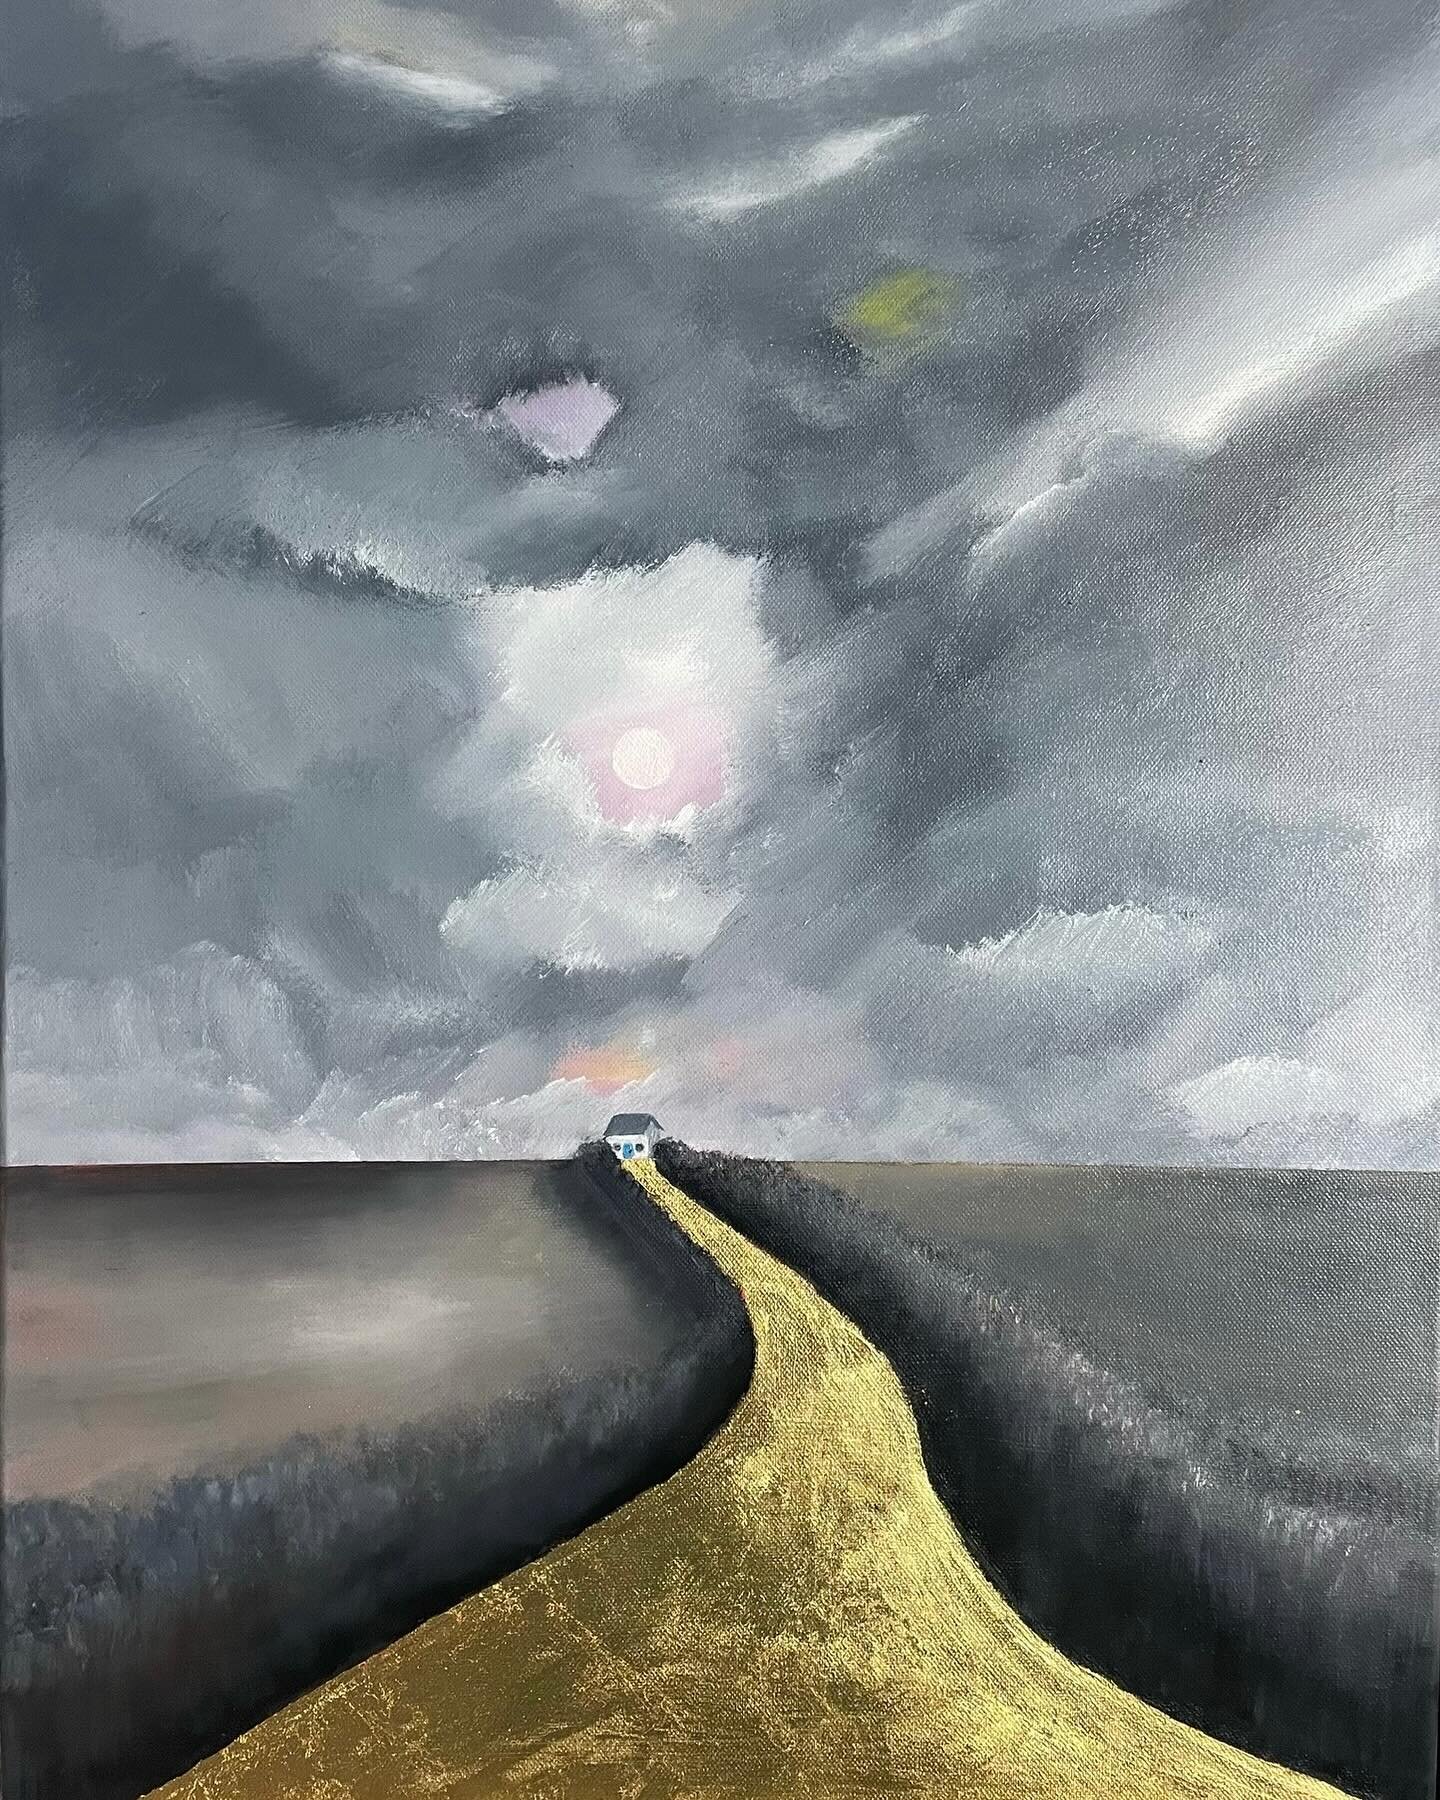 &ldquo;The Road Home is Paved in Gold&rdquo;
50cm x 70cm
The title of this painting says it all for me but I think a painting can have many interpretations &amp; layers of meaning which can differ for different people, but for me this is about the co